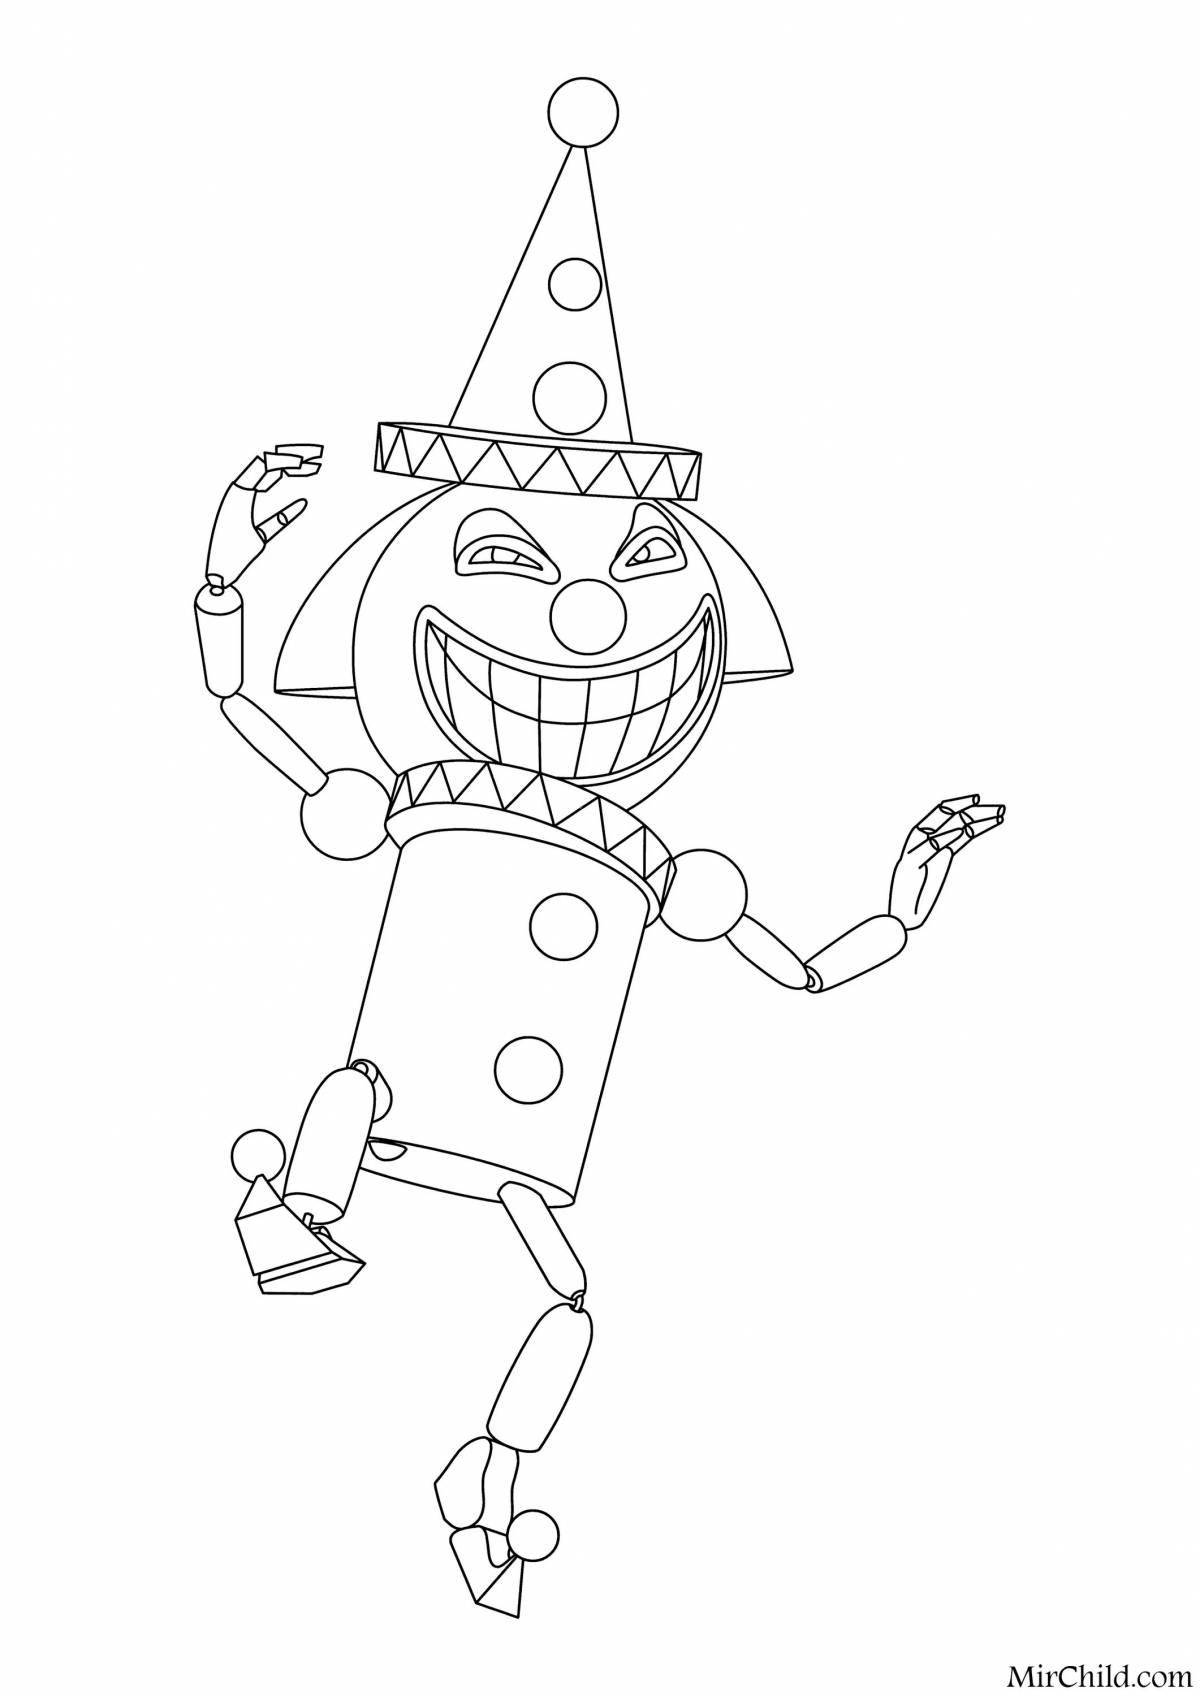 Iron woodman's bright coloring page